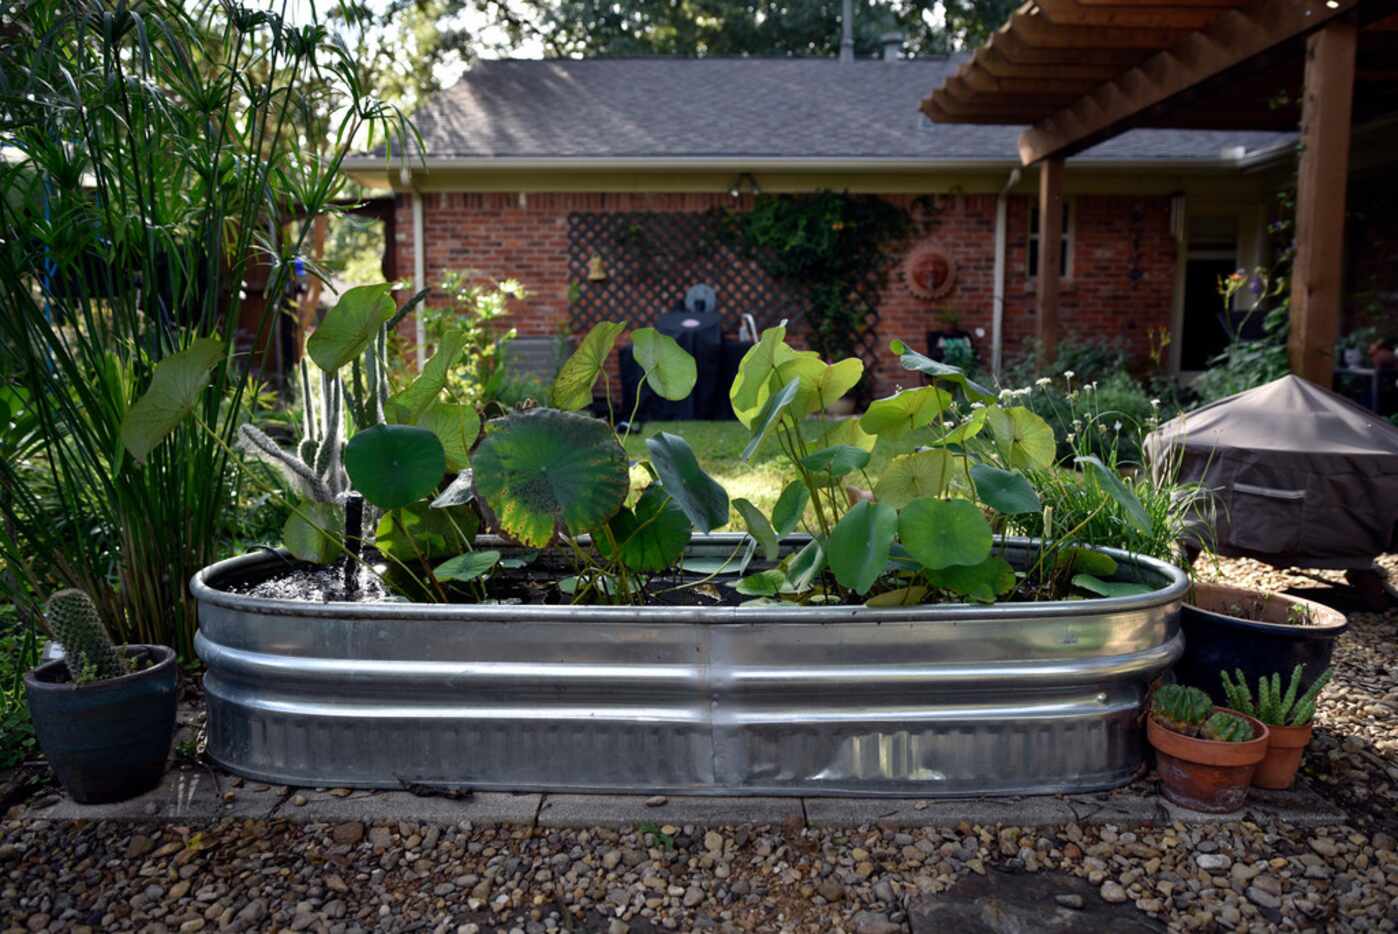 A lotus pond in the backyard of the Saucedo family's home in Dallas.